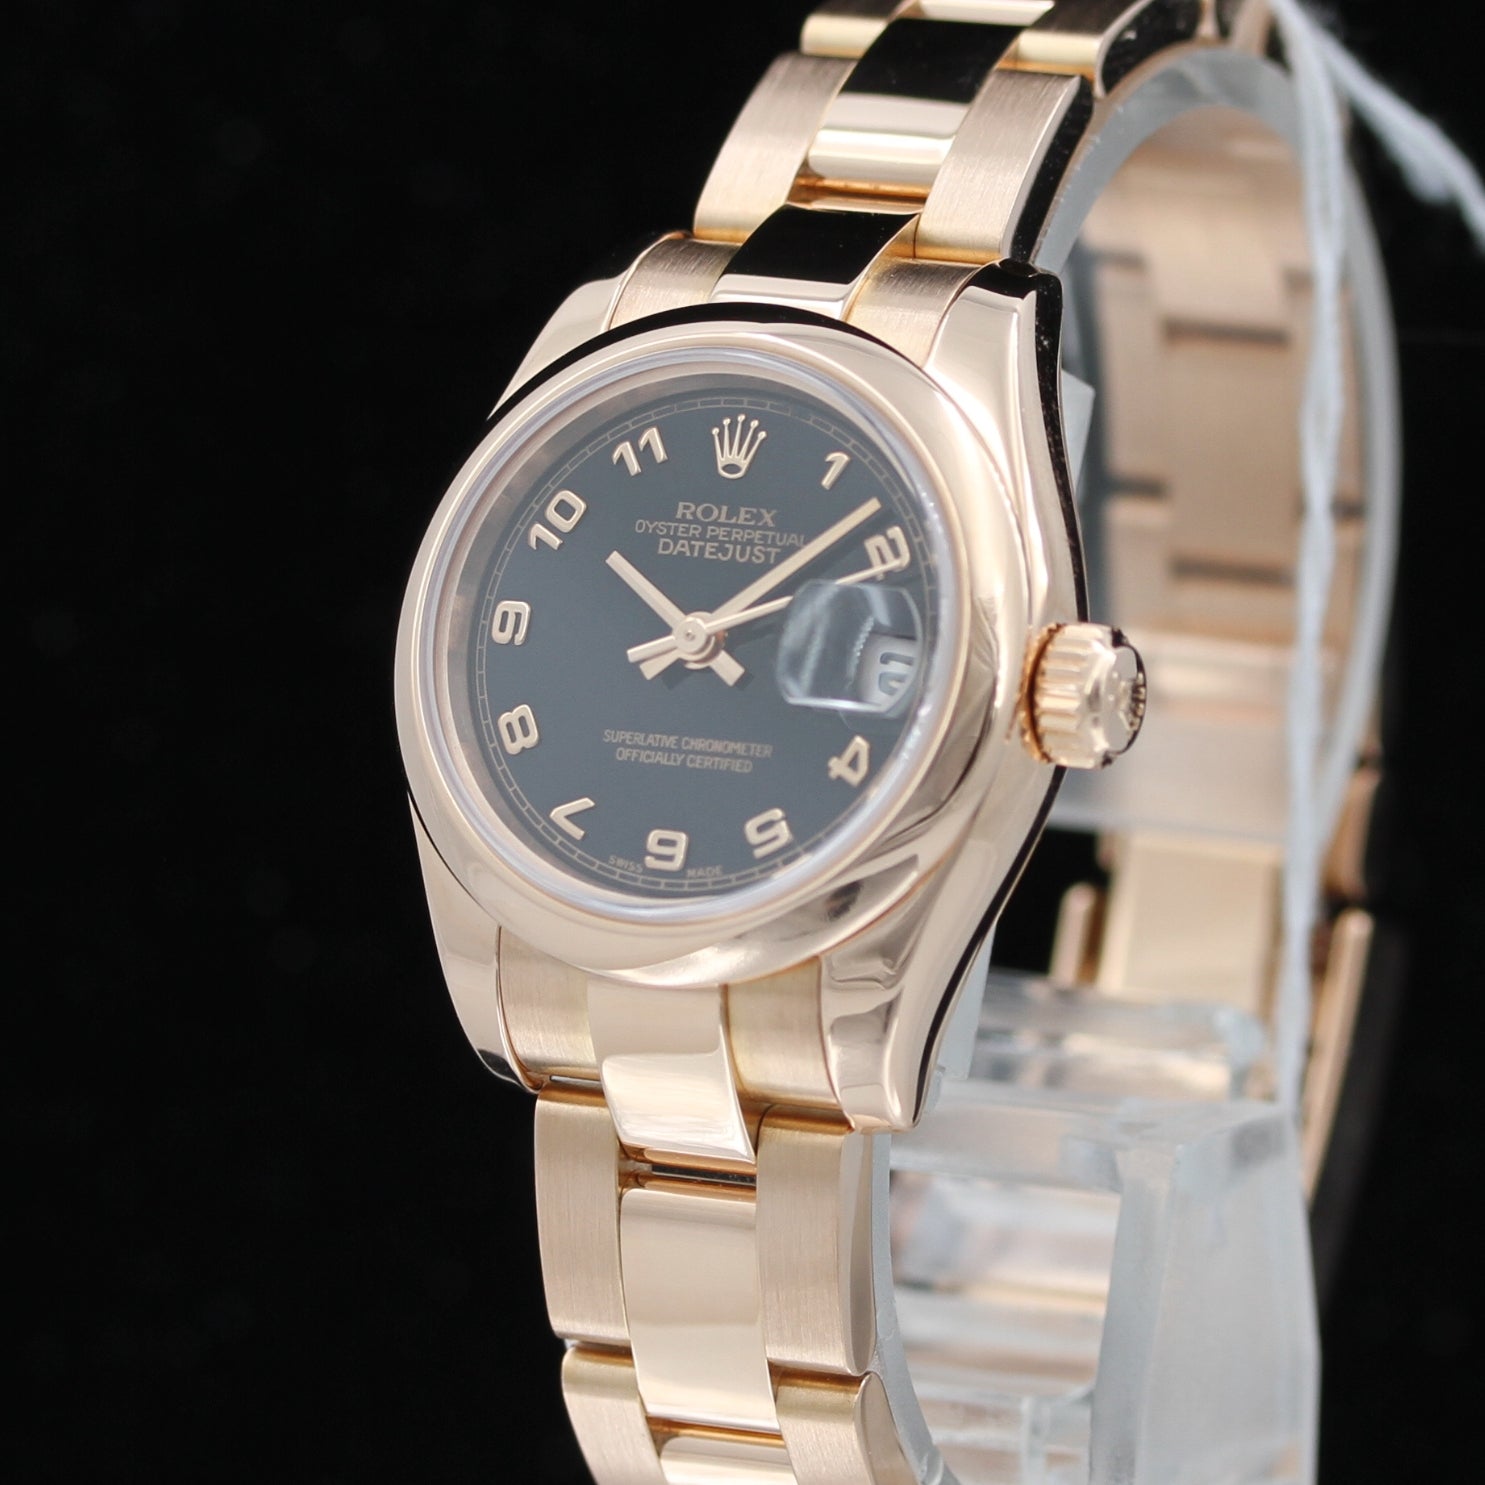 Rolex Lady Datejust 26, Everose Gold, Oyster, Ref. 179165, B+P - LUXUHRIA